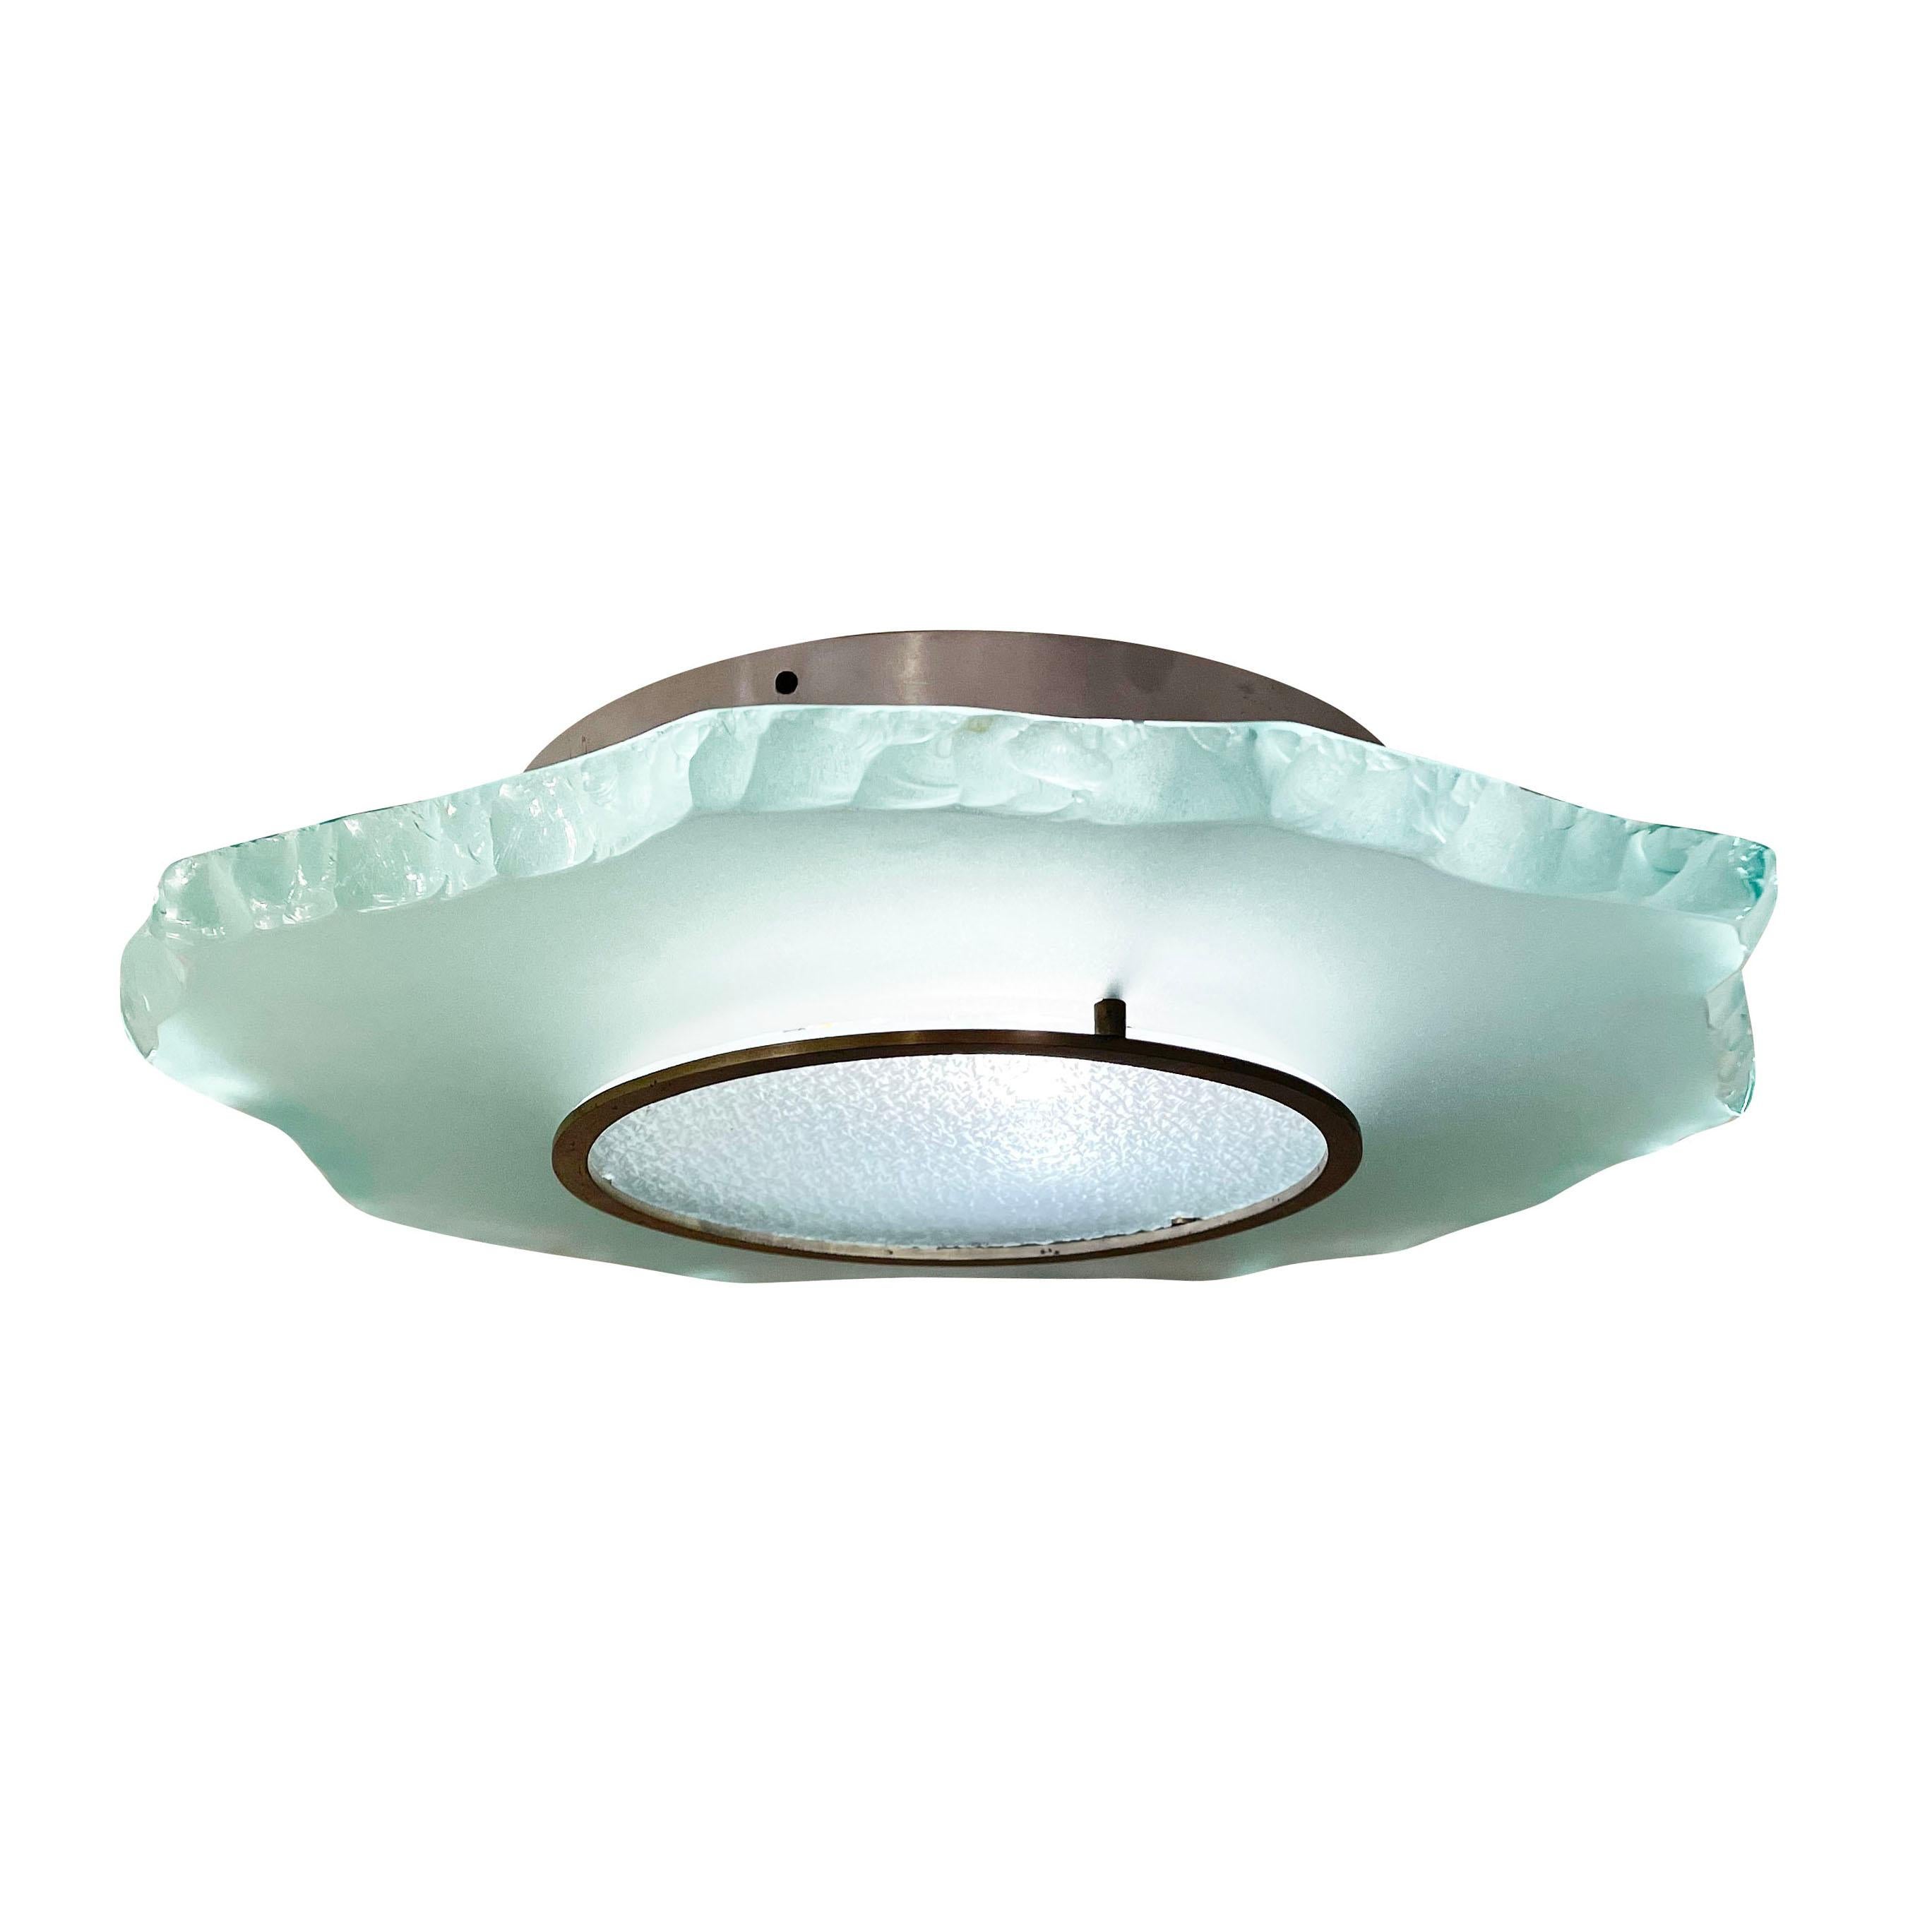 Fontana Arte flush mount light model 2312 designed by Max Ingrand in the 1950s. Features a central molded glass and an irregular thick glass halo. The glass has the classic Fontana Arte green tint to it. Hardware is brushed nickel. Holds three E26